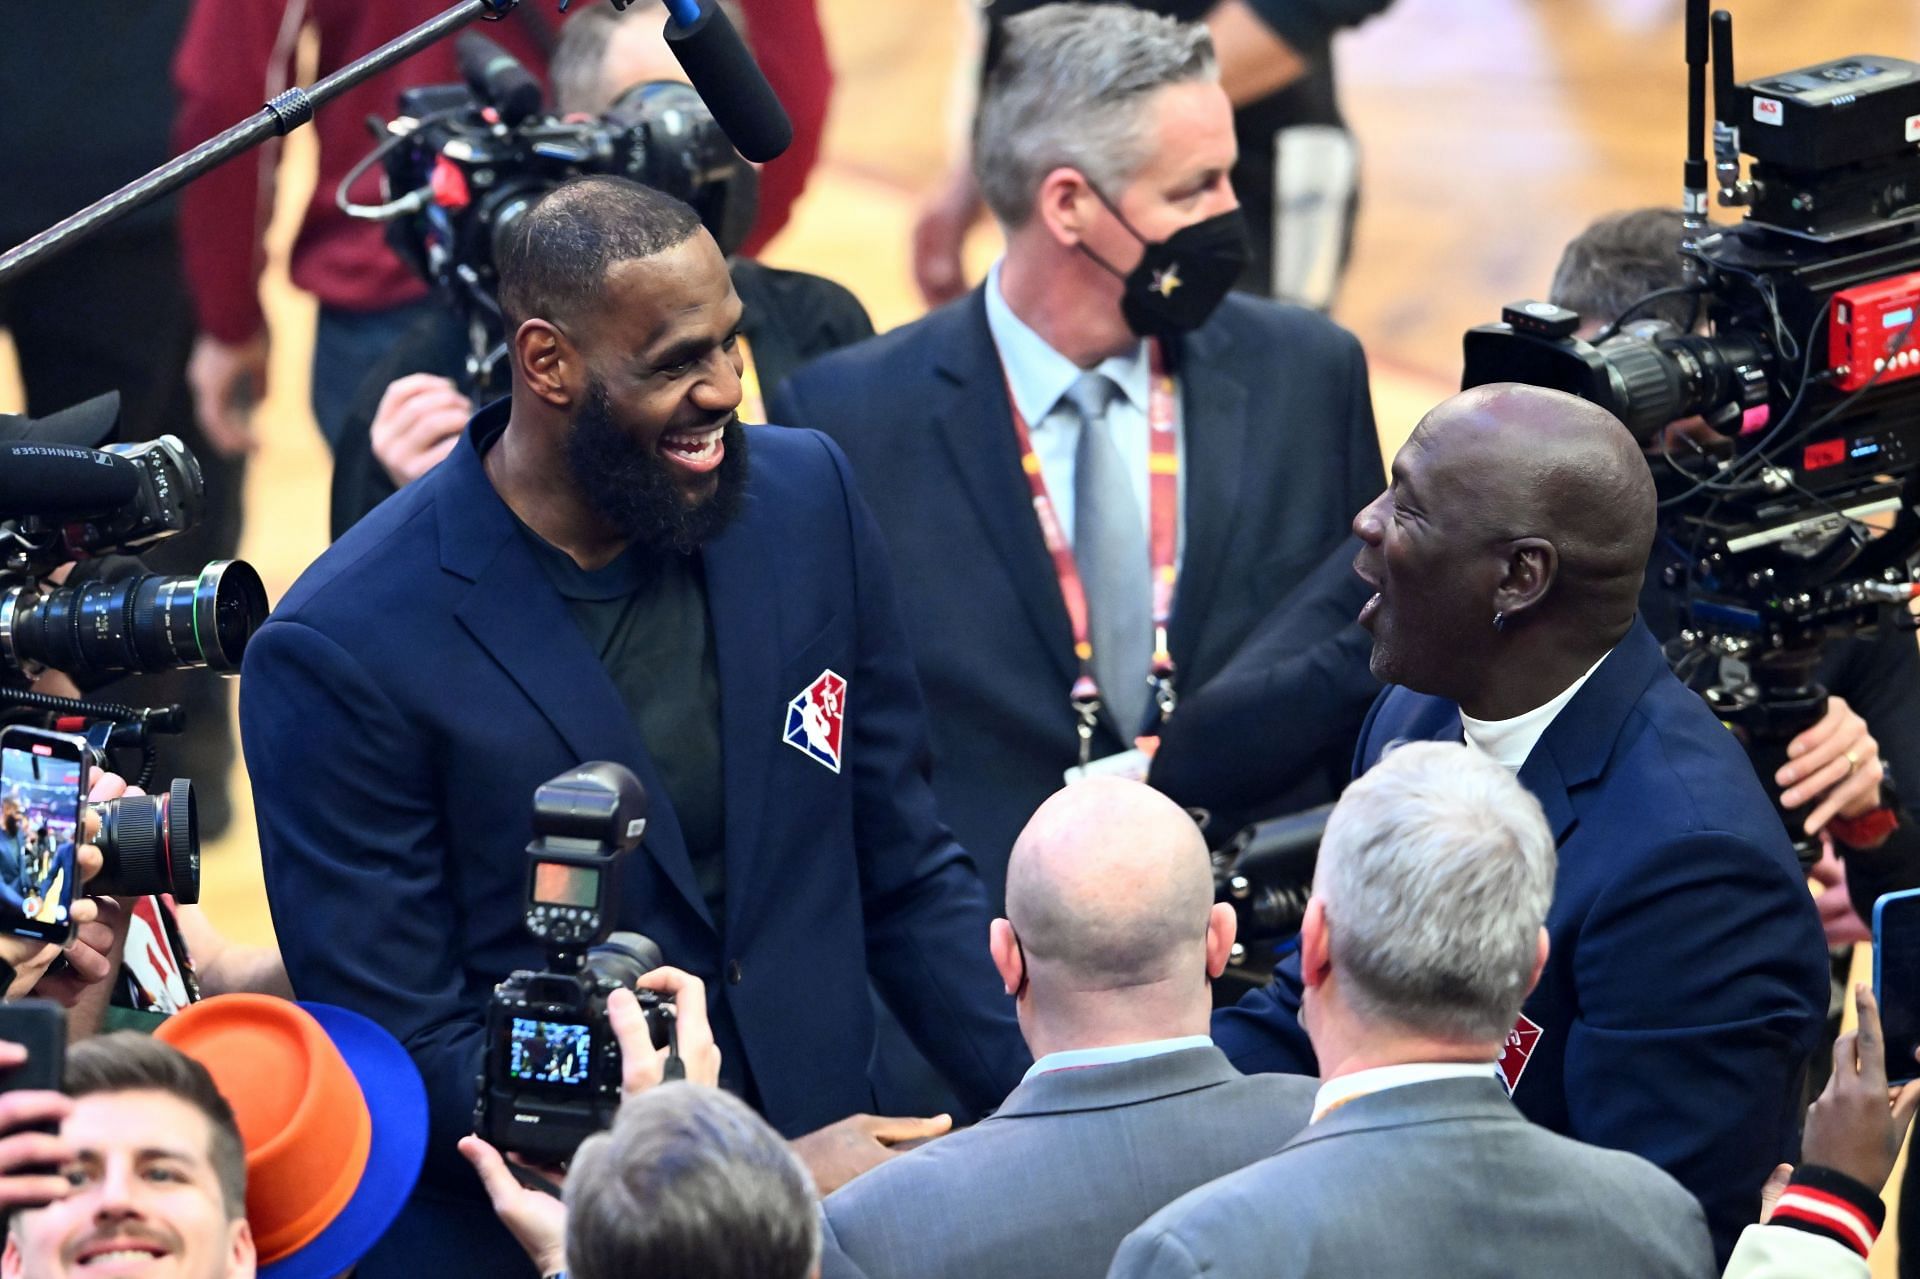 LeBron James, left, and Michael Jordan, right at the 2022 NBA All-Star Game